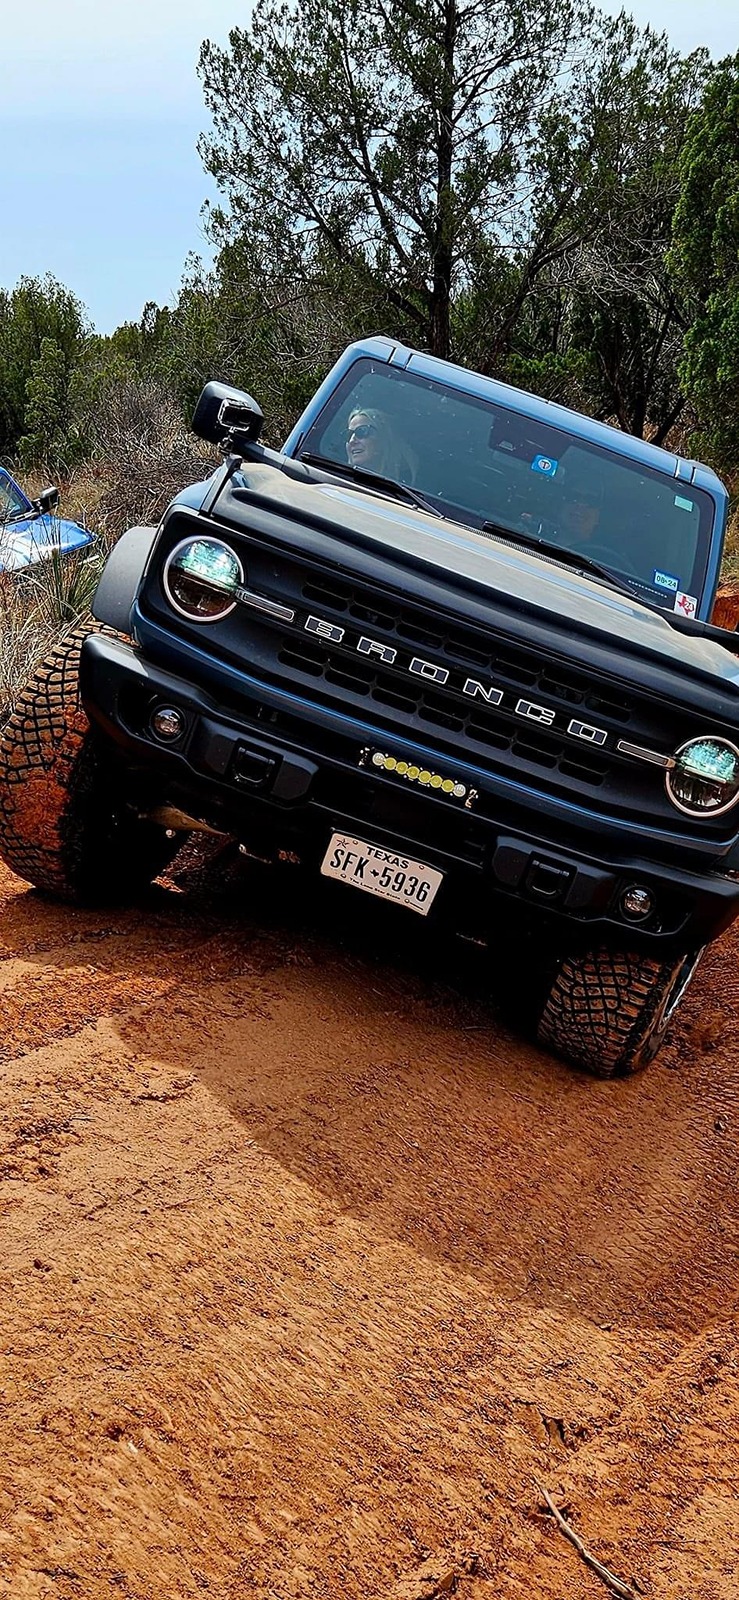 Ford Bronco Front End Friday! Show off your Bronco! IMG_4703.JPG